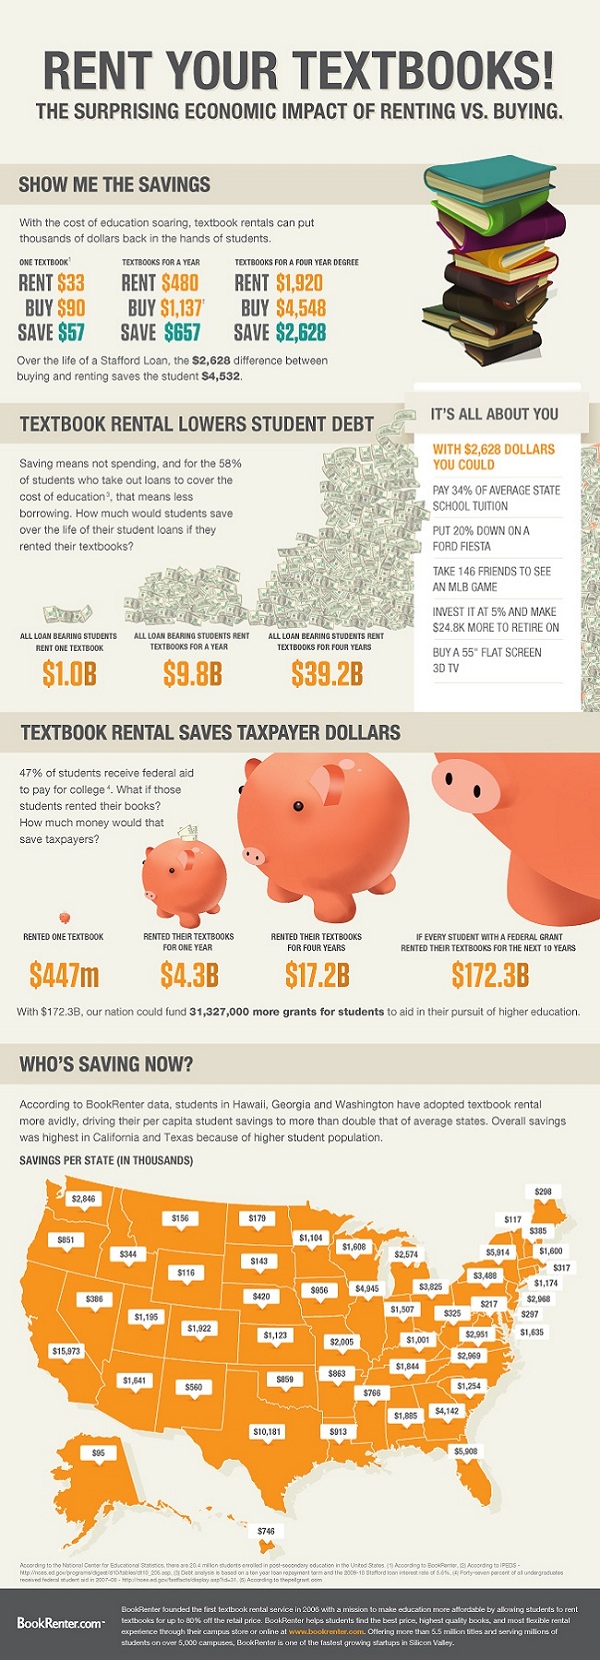 Why You Should Rent Your Textbooks!